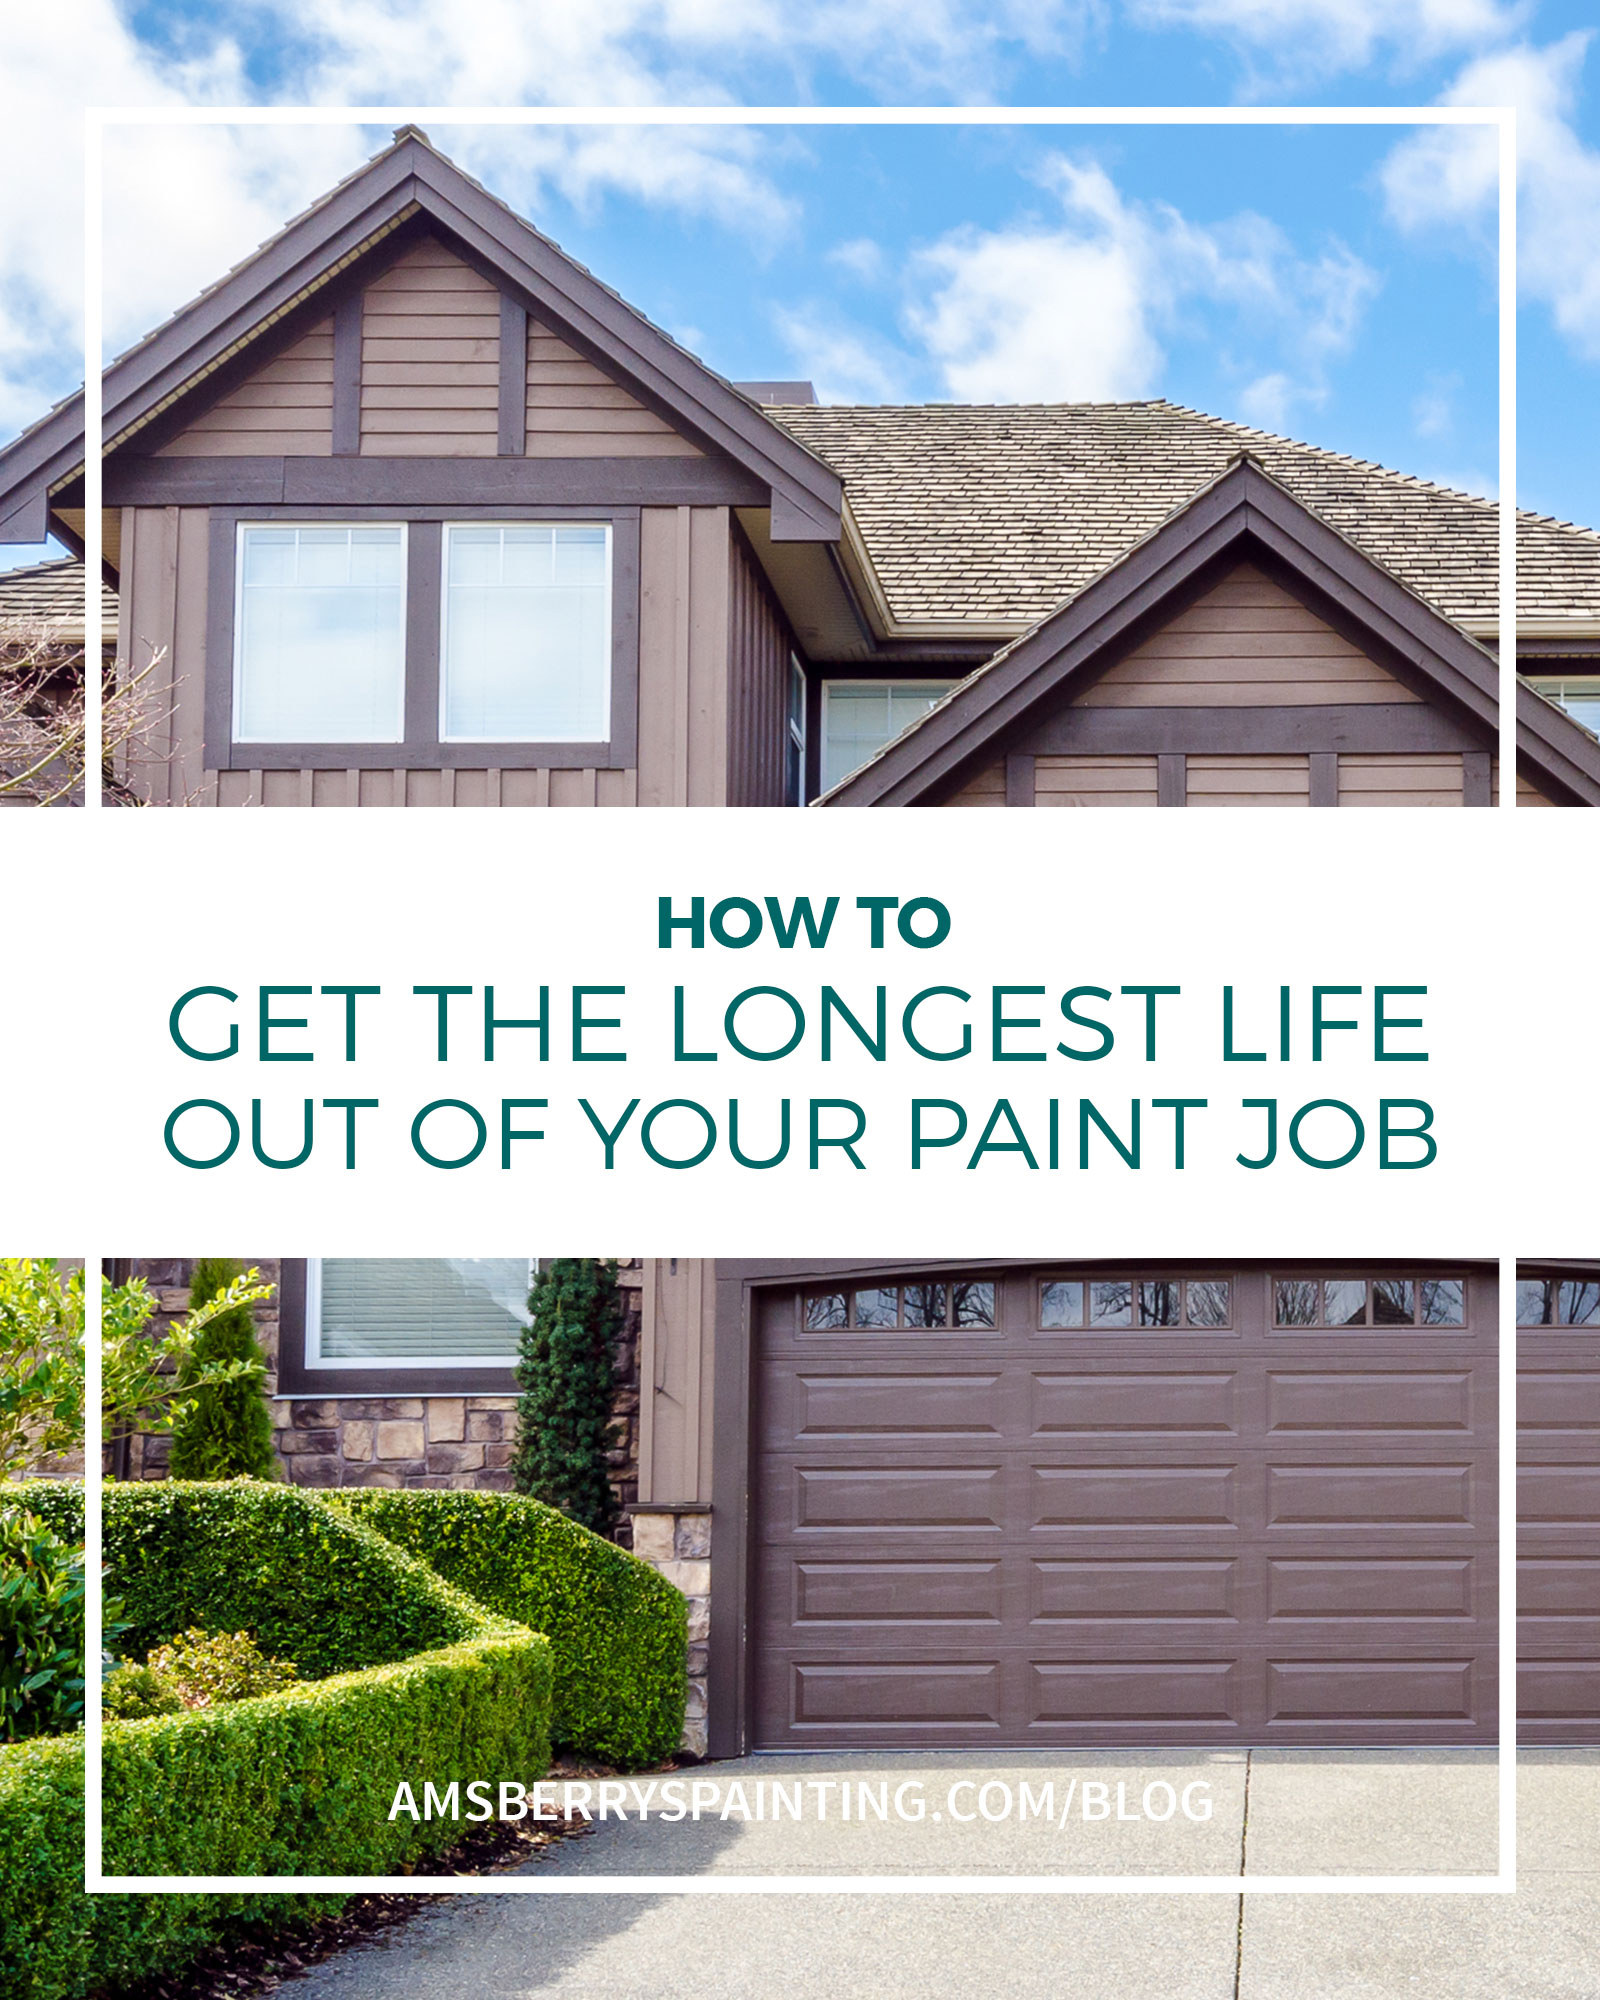 How to get the longest life out of your paint job